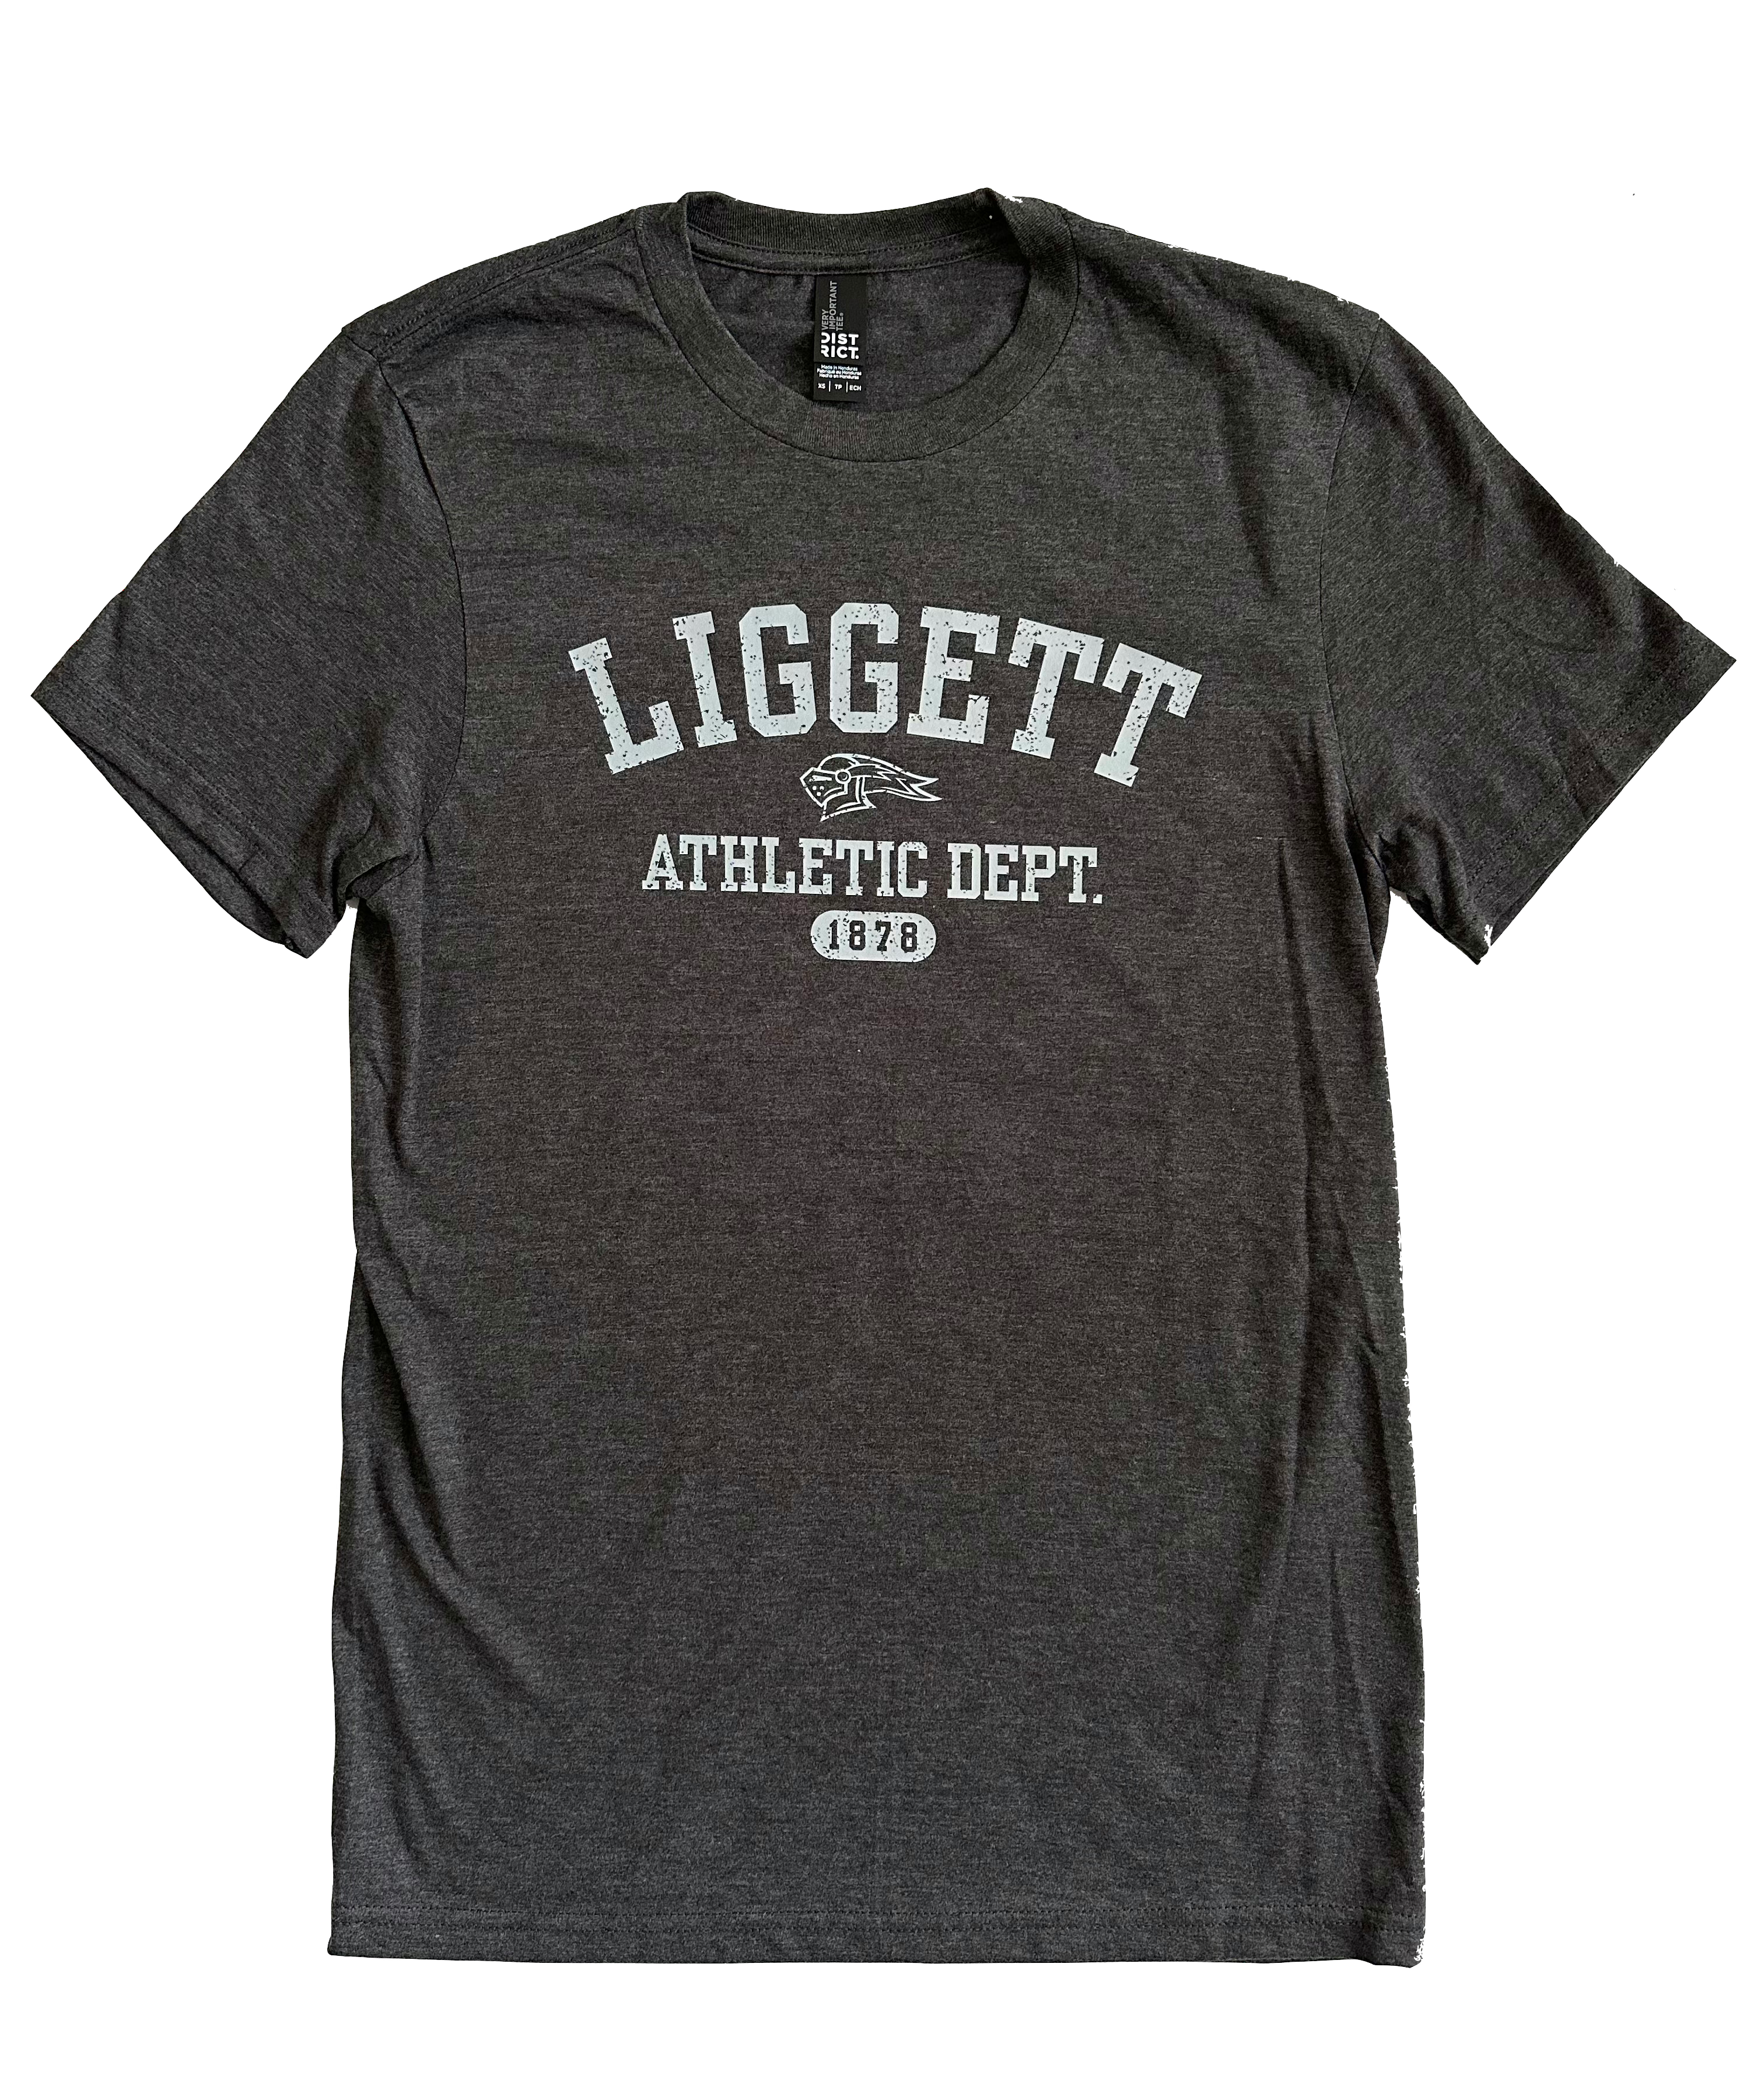 NEW Adult Liggett Athletics Heather Charcoal SS Tee